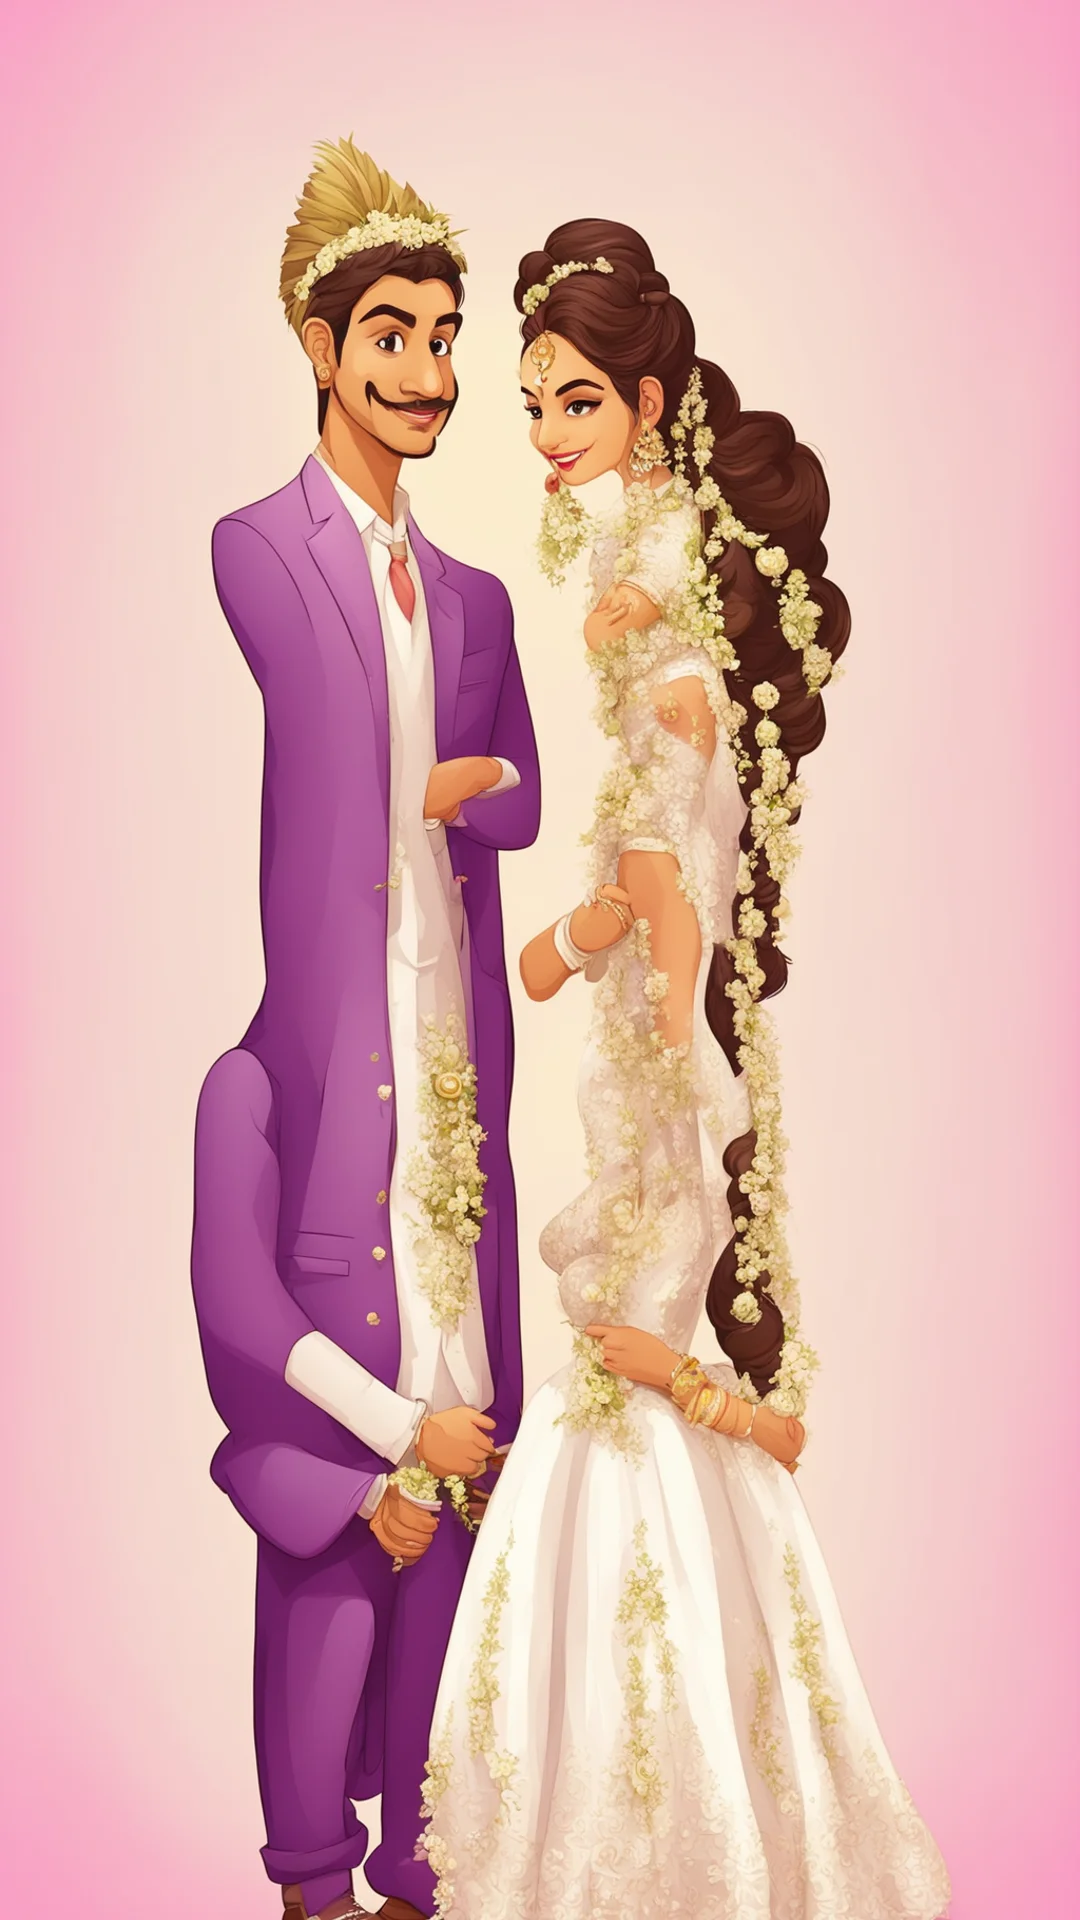 aibride and groom cute couple cartoon characters indian tall